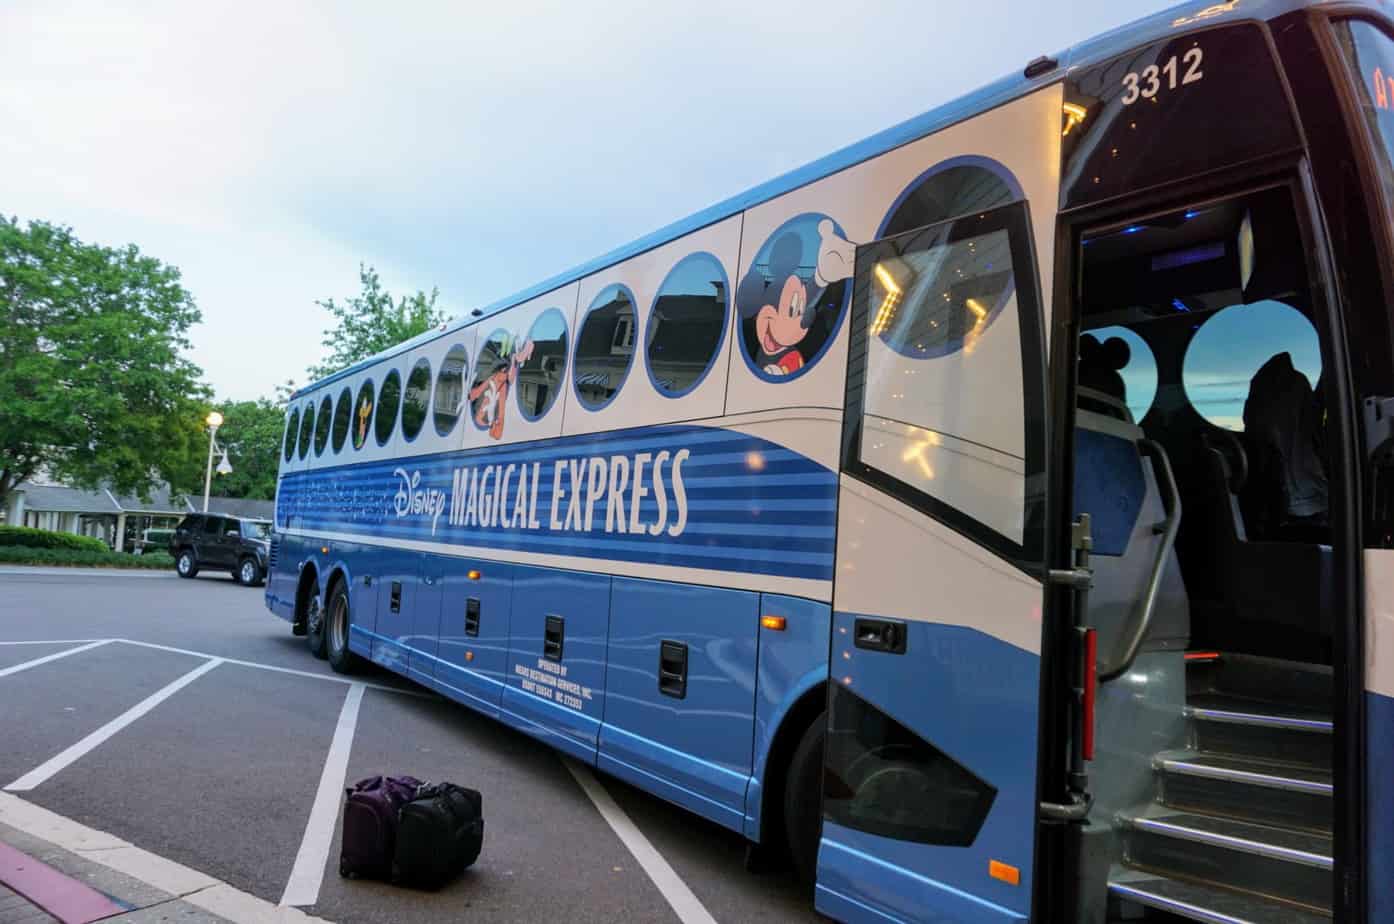 transportation from MCO to disney after magical express is gone